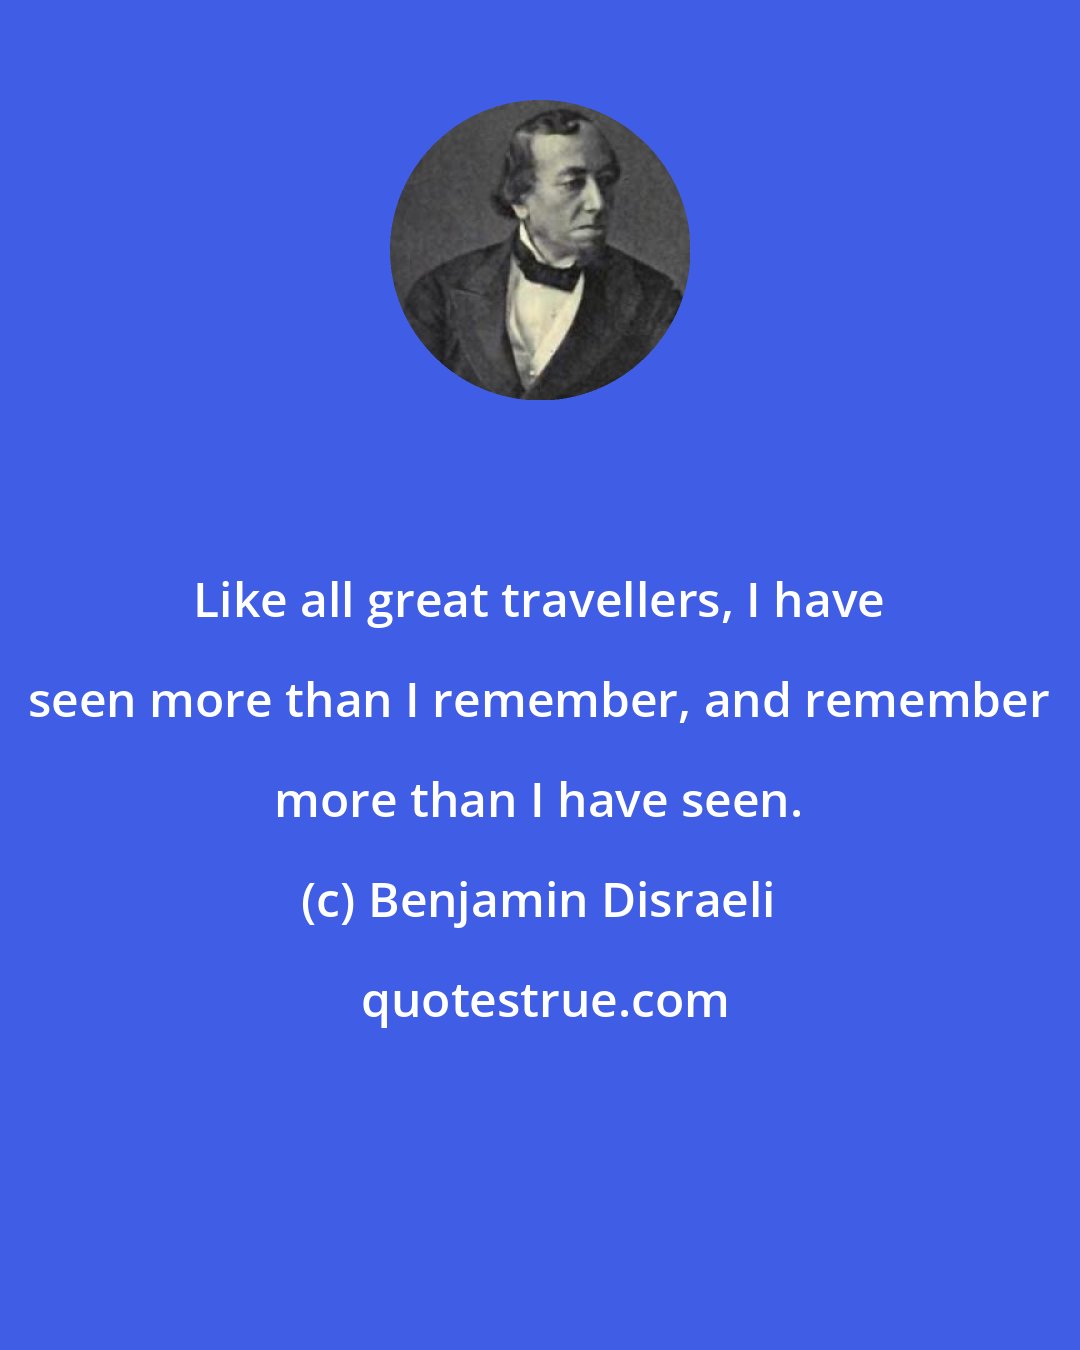 Benjamin Disraeli: Like all great travellers, I have seen more than I remember, and remember more than I have seen.